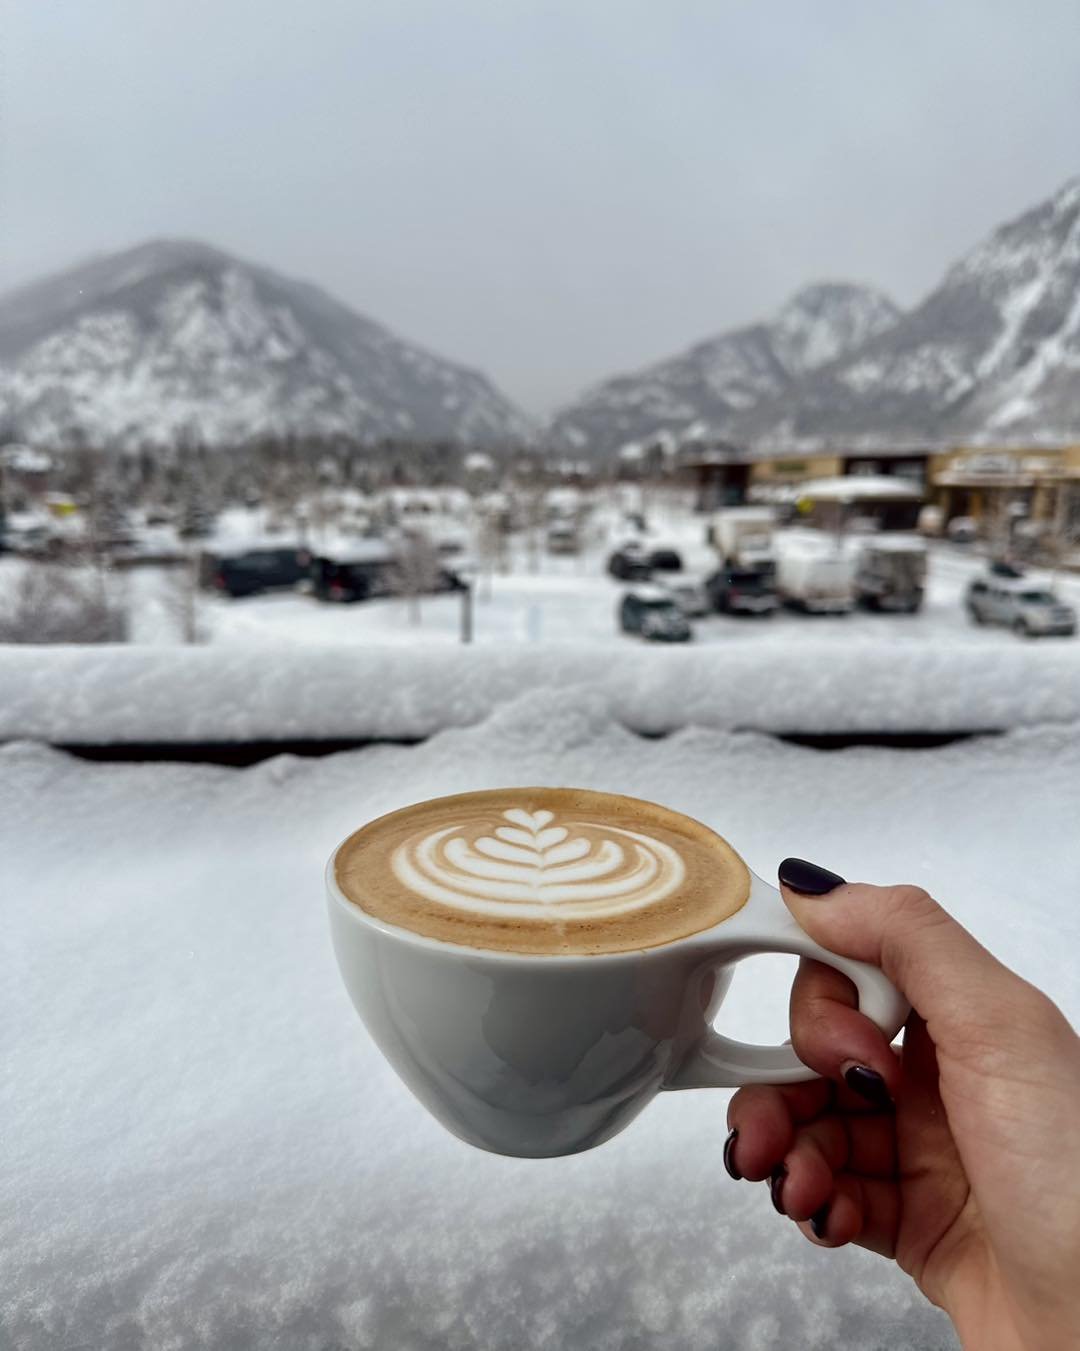 Not all who wander are lost; some are simply looking for coffee. Enjoy a cup at Mountain Dweller today!